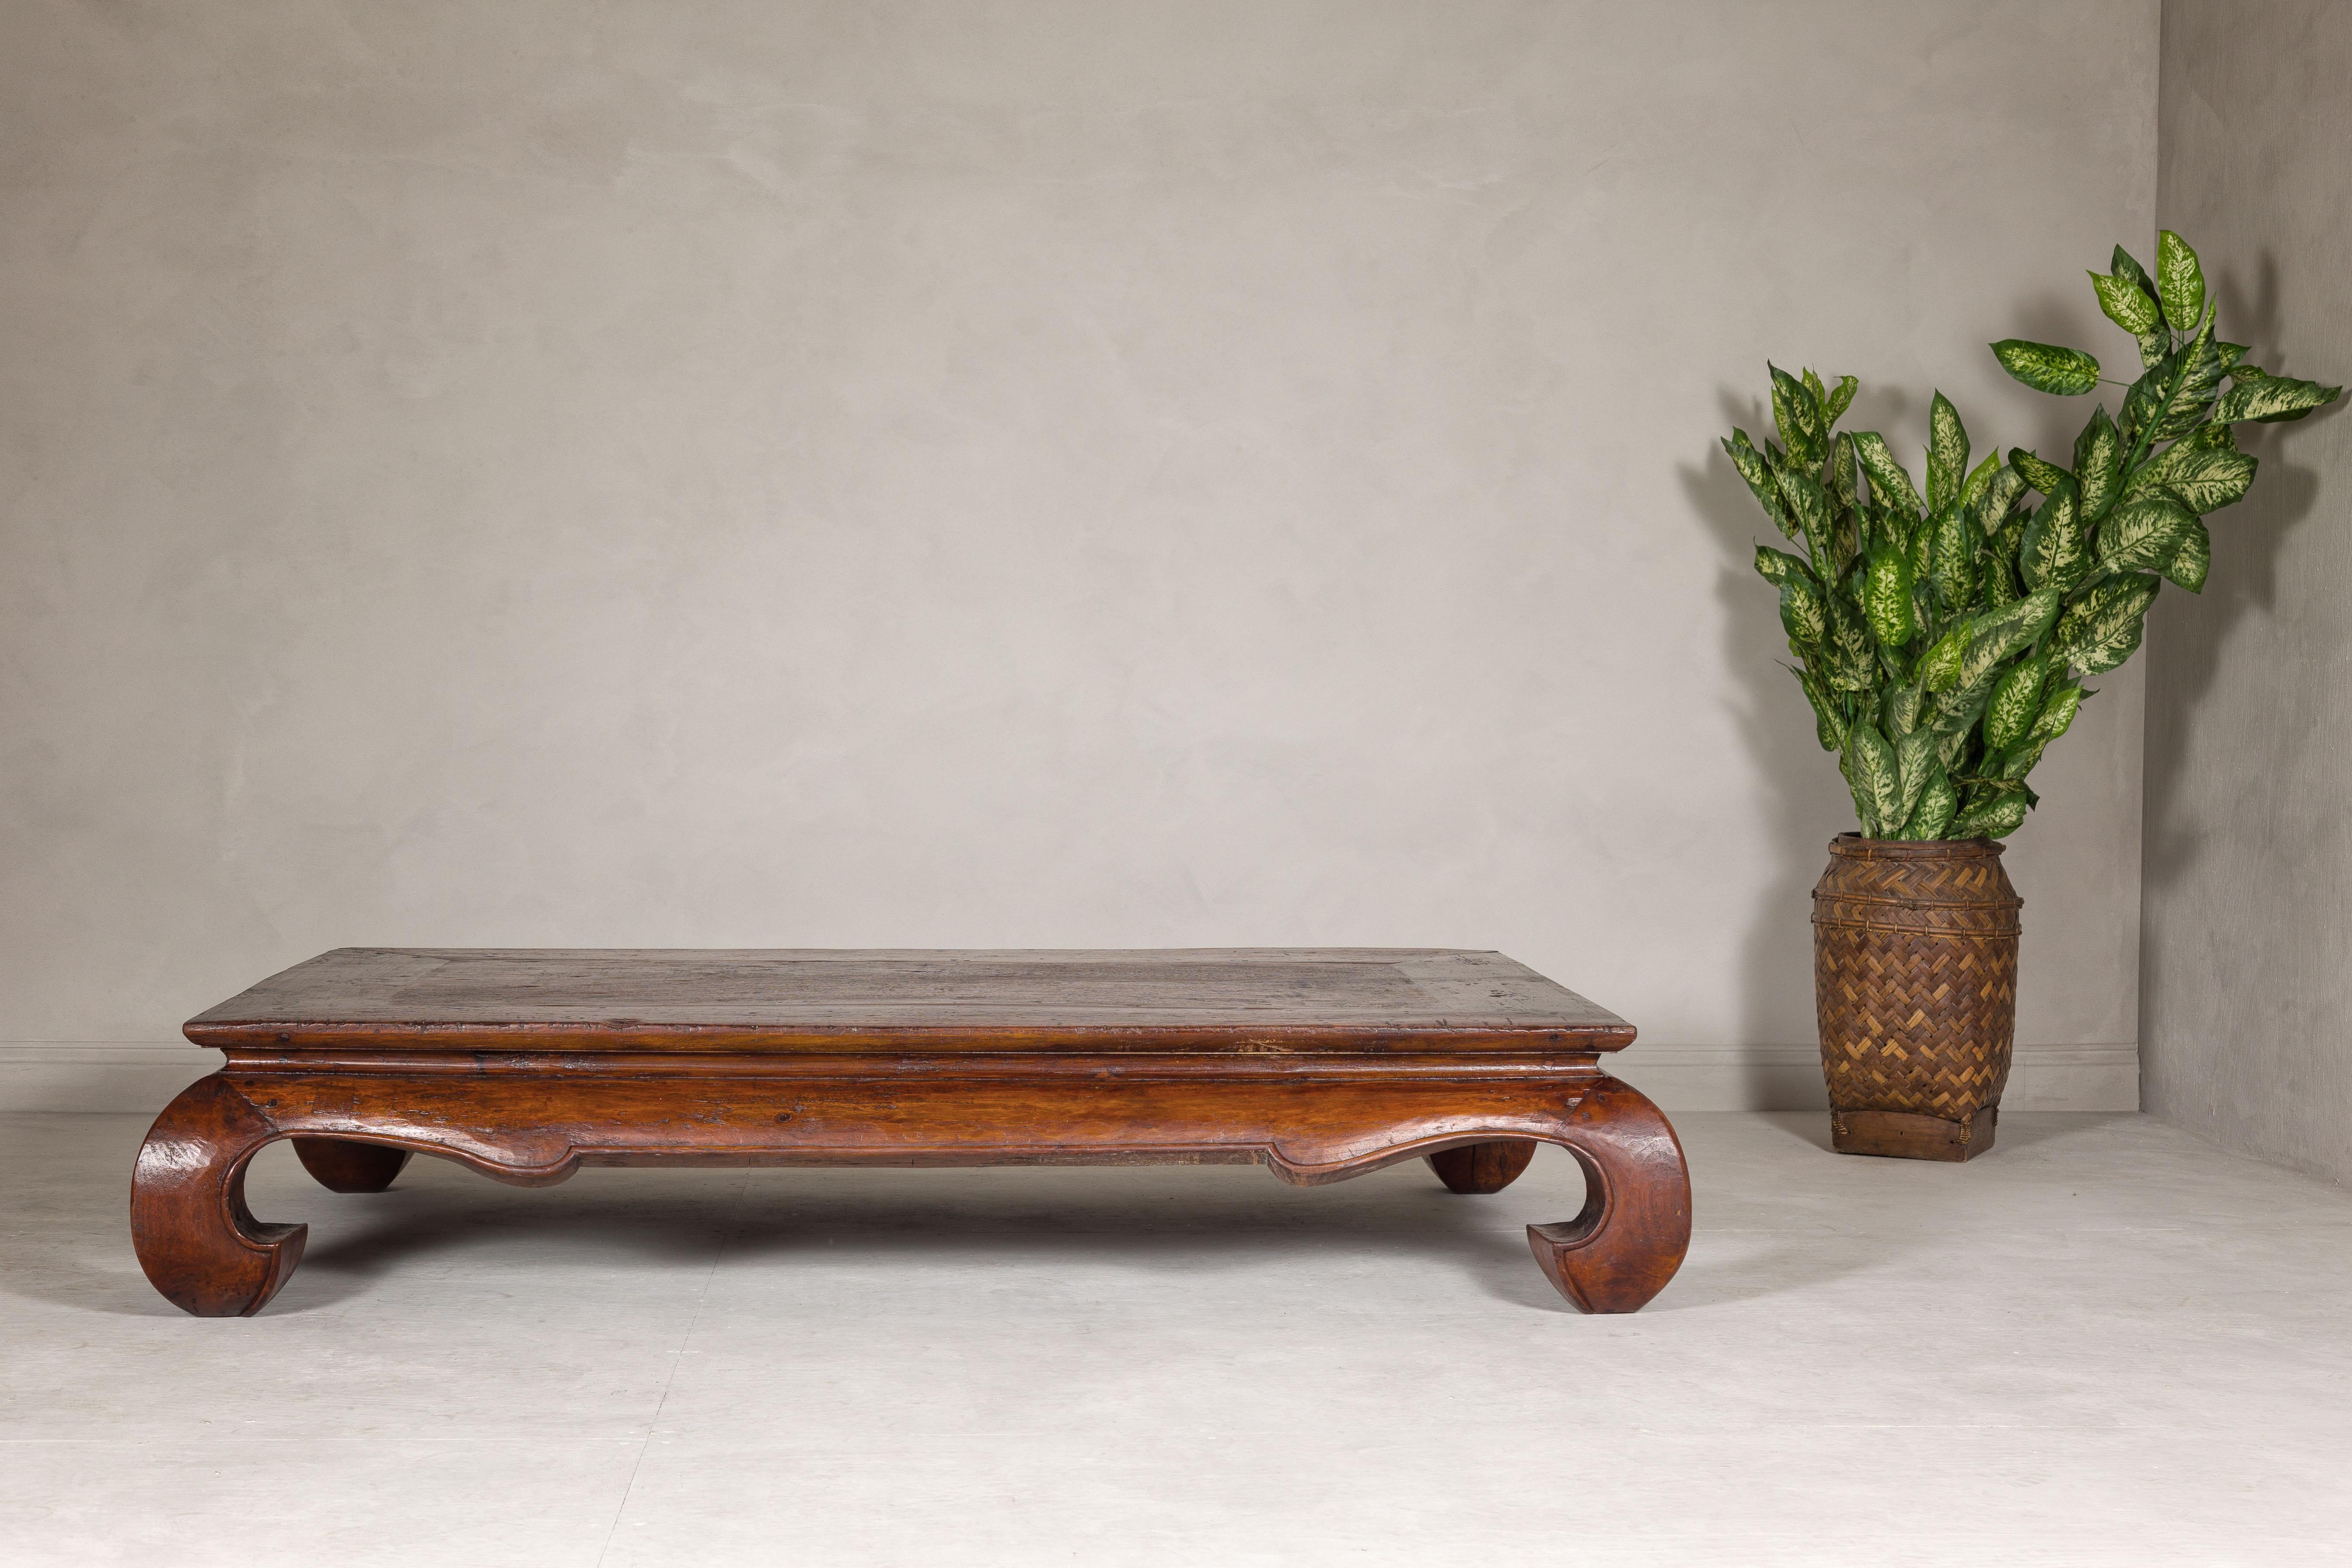 Qing Dynasty 19th Century Chow Leg Kang Table with Weathered Rustic Patina In Good Condition For Sale In Yonkers, NY